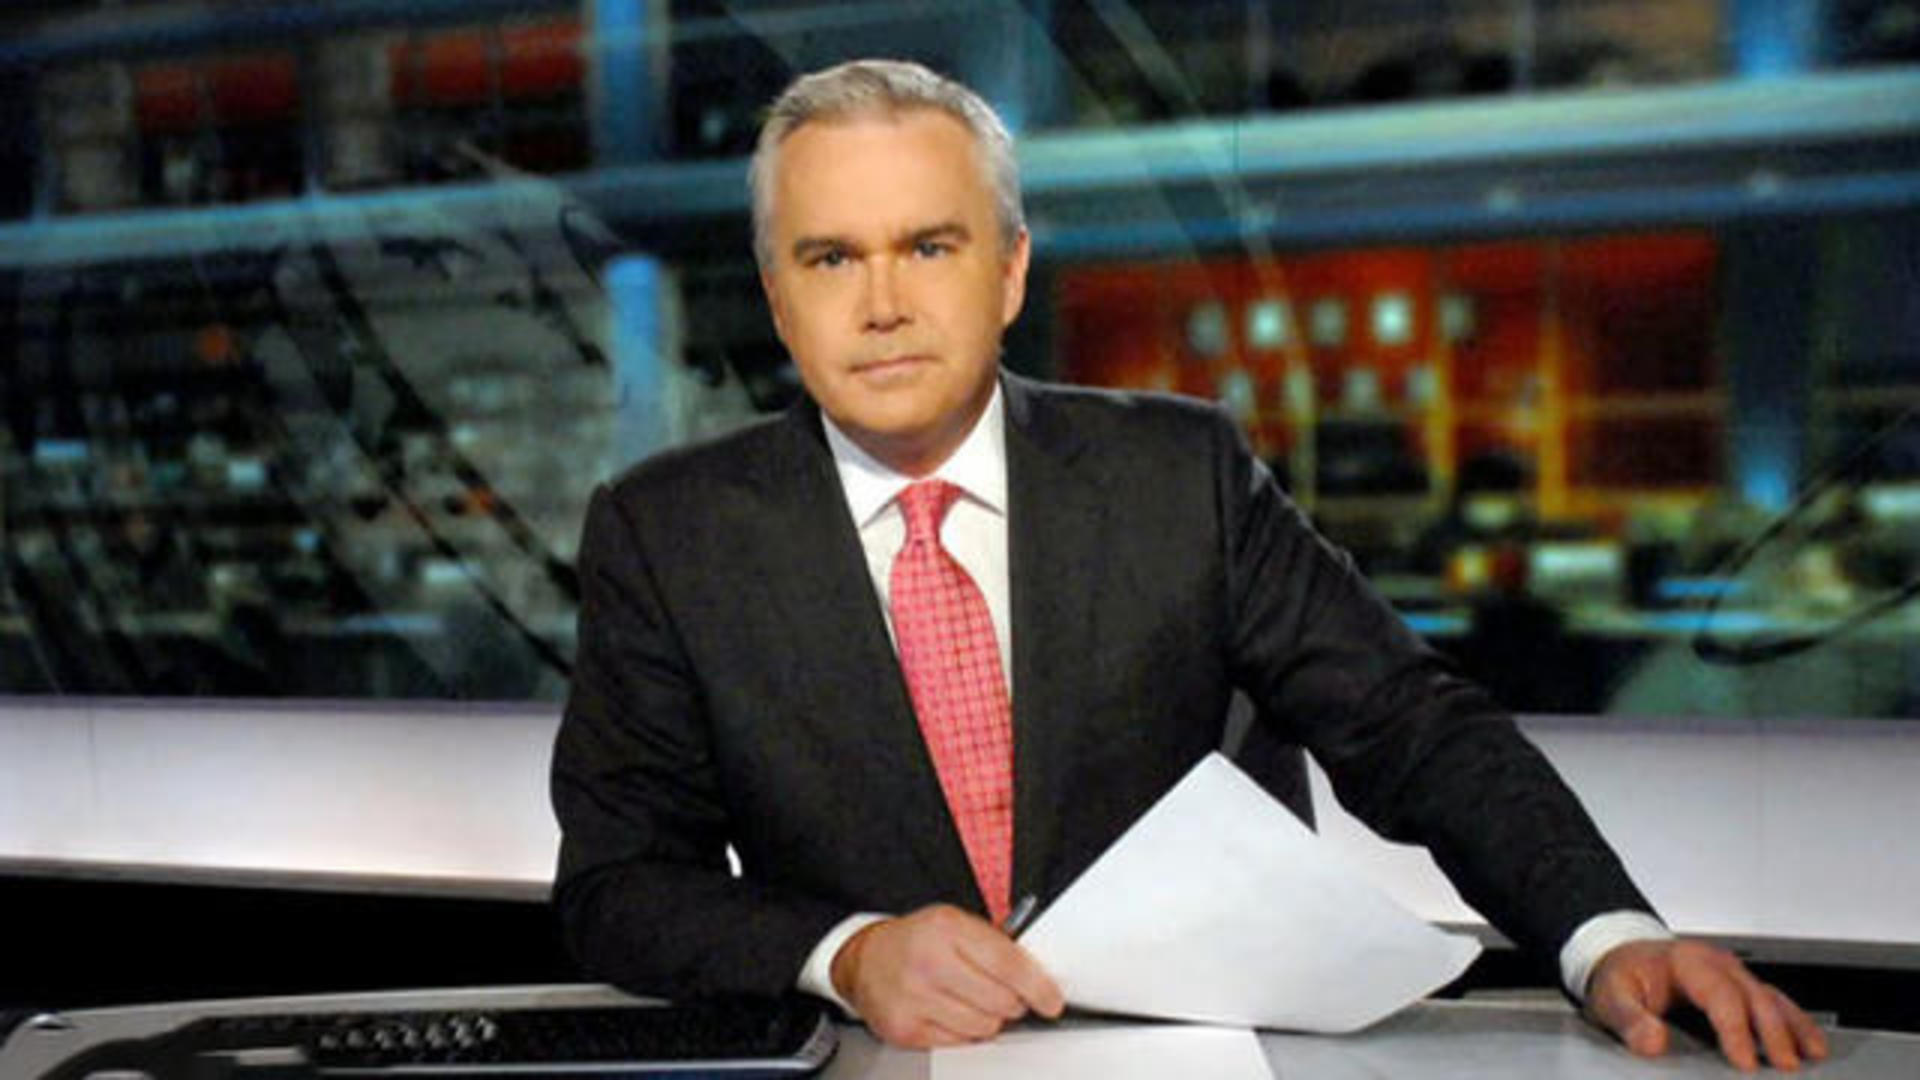 Huw Edwards, BBC presenter, named in connection with sex photo scandal photo pic